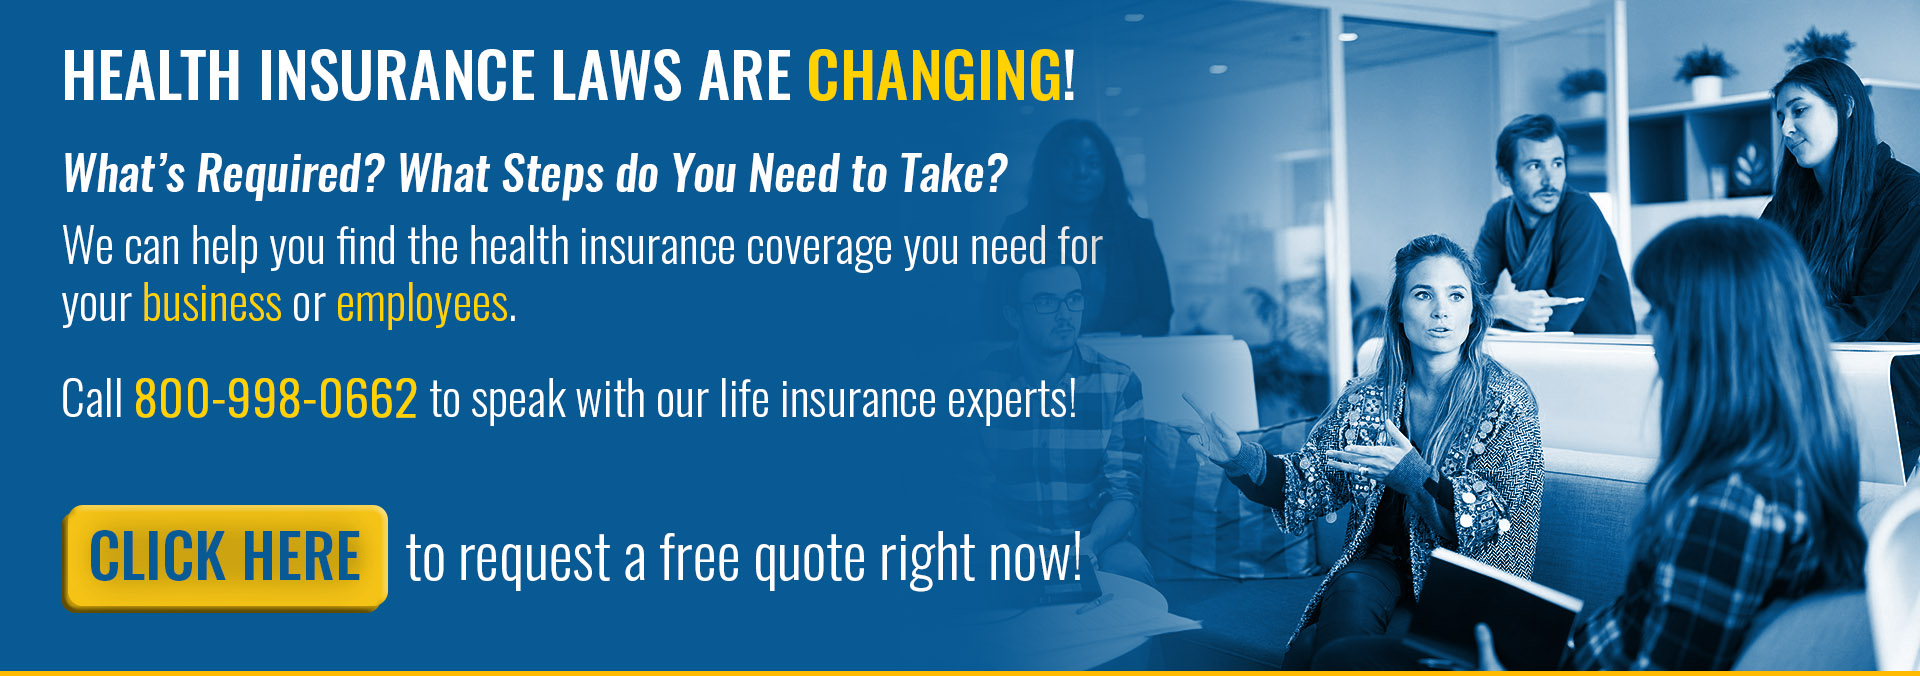 Health insurance laws are changing. click here to request a free quote right now.